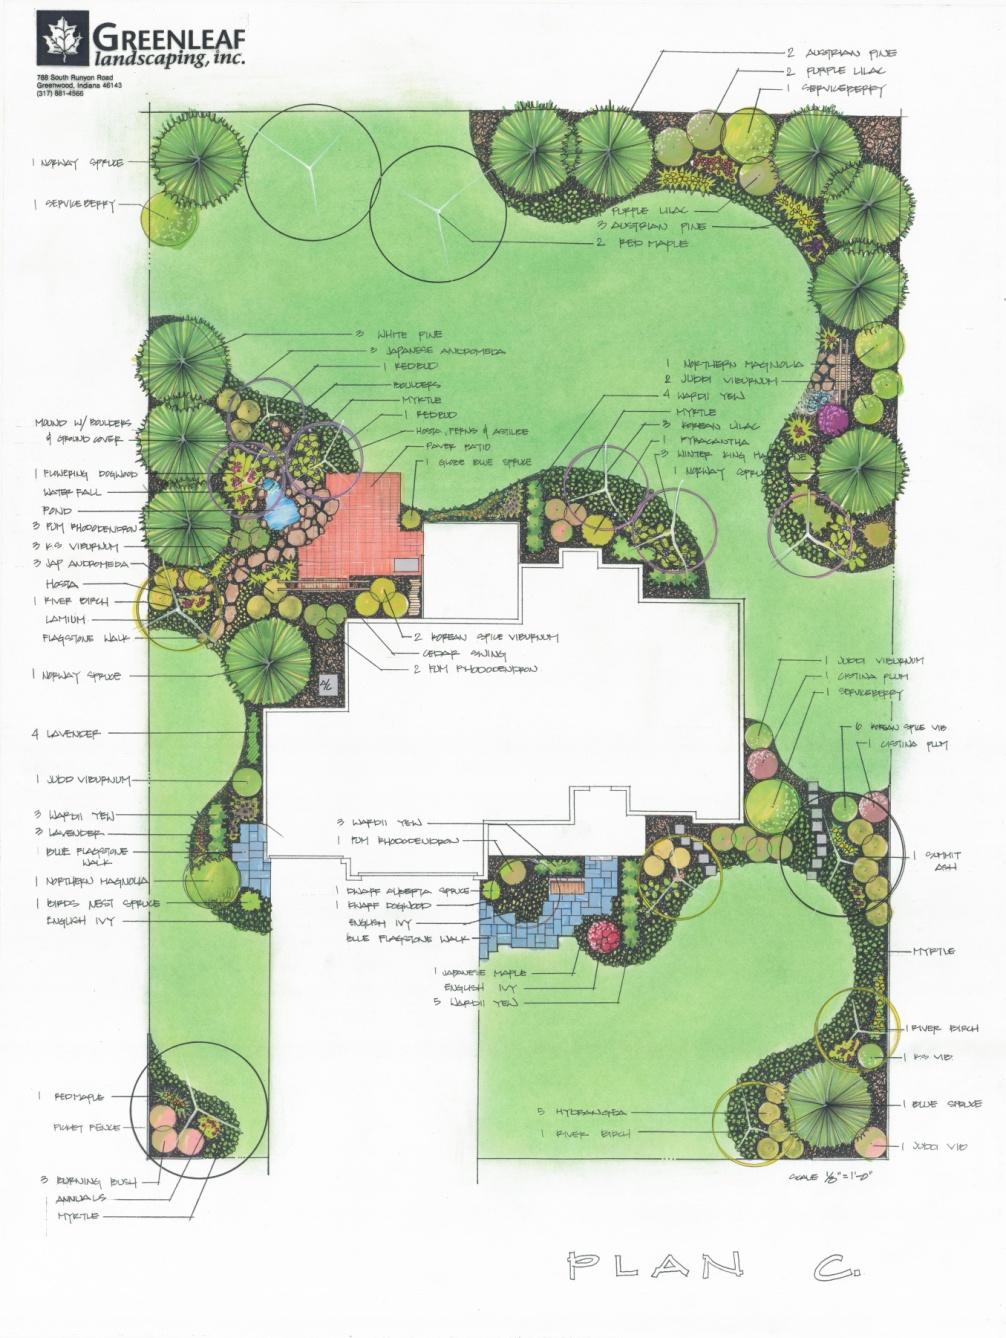 wood, Indiana 46143 LEVEL 2 - Expanded Design - $200 to $500 Level 2 design fee includes an expanded design of a mid to large sized patio or plantscape with a variety of design detail and project